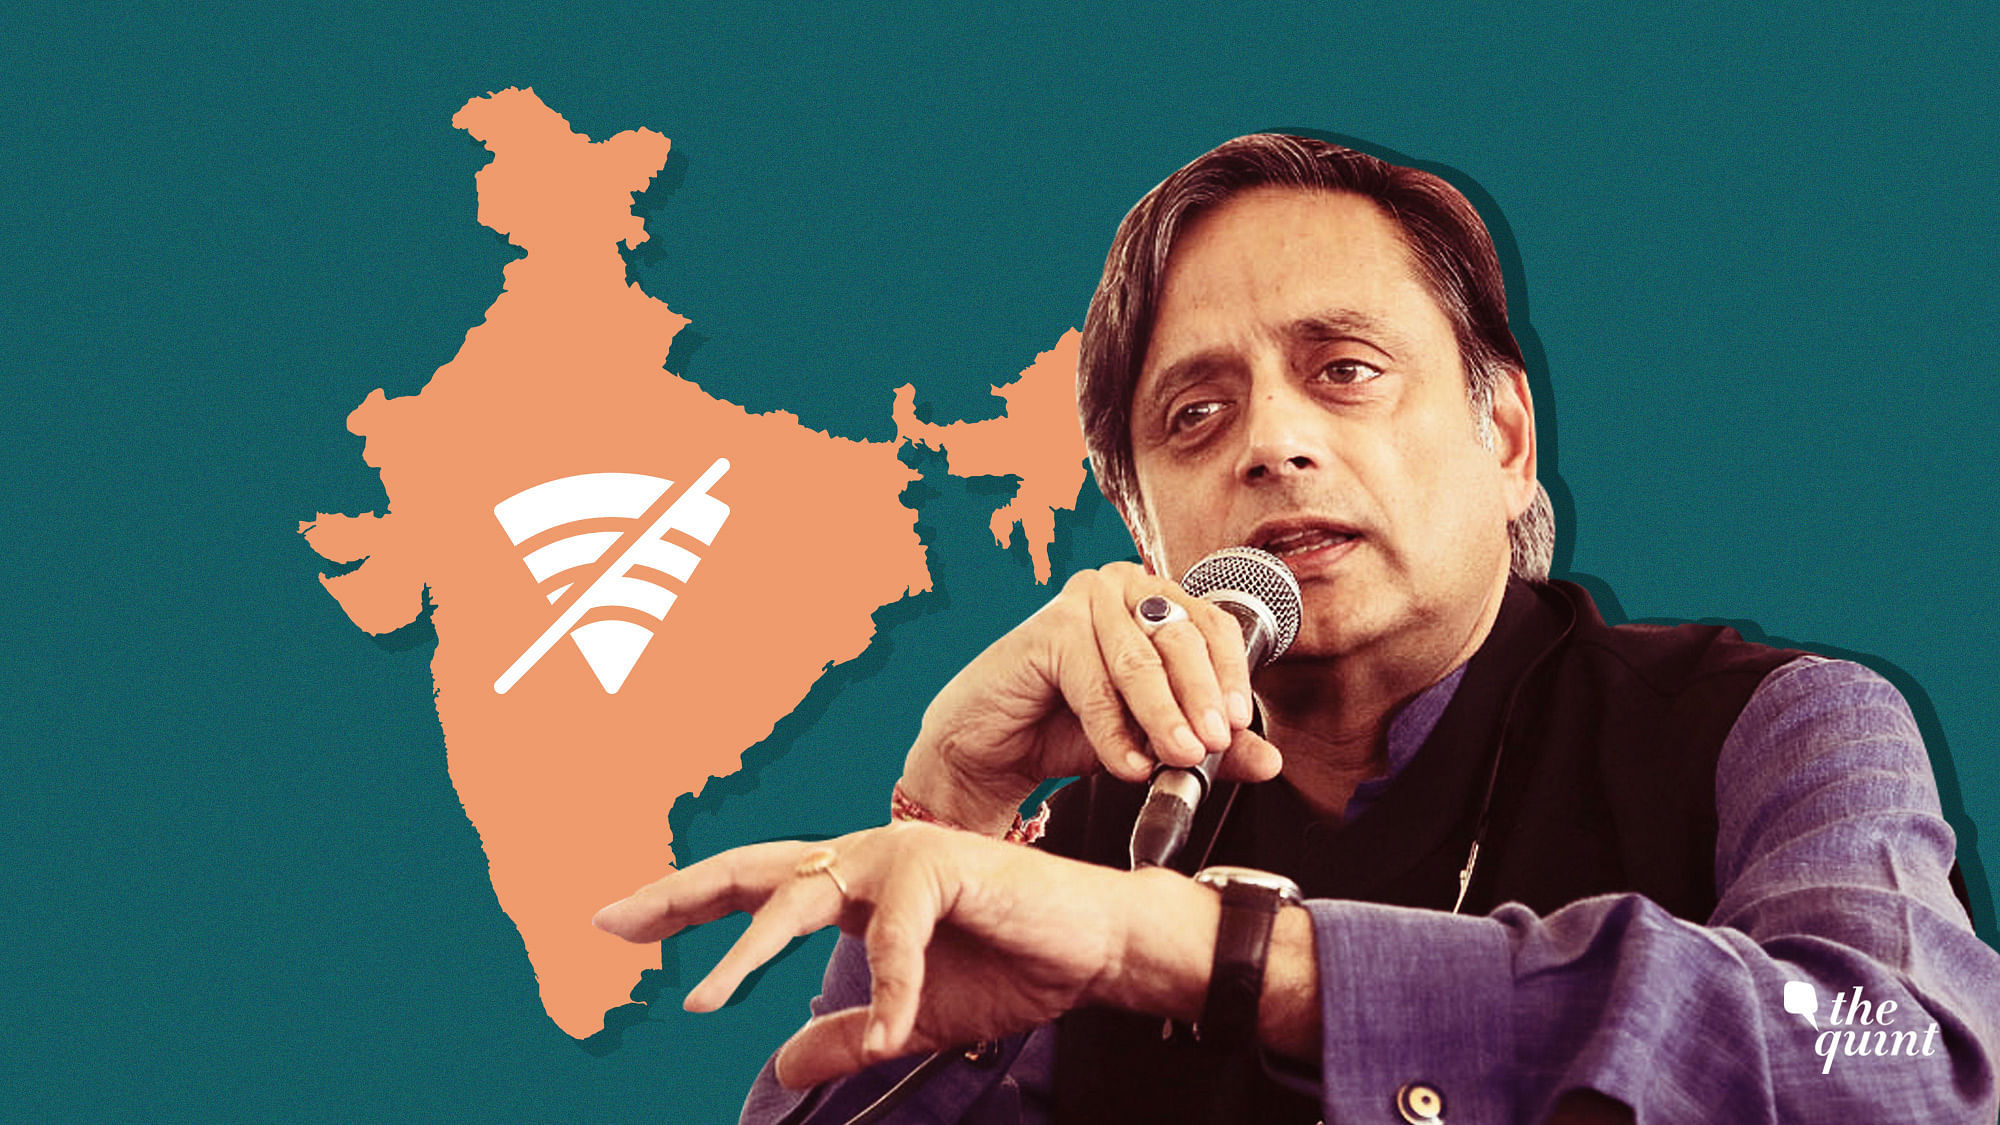 Shashi Tharoor in a Q&amp;A on internet shutdowns in India.